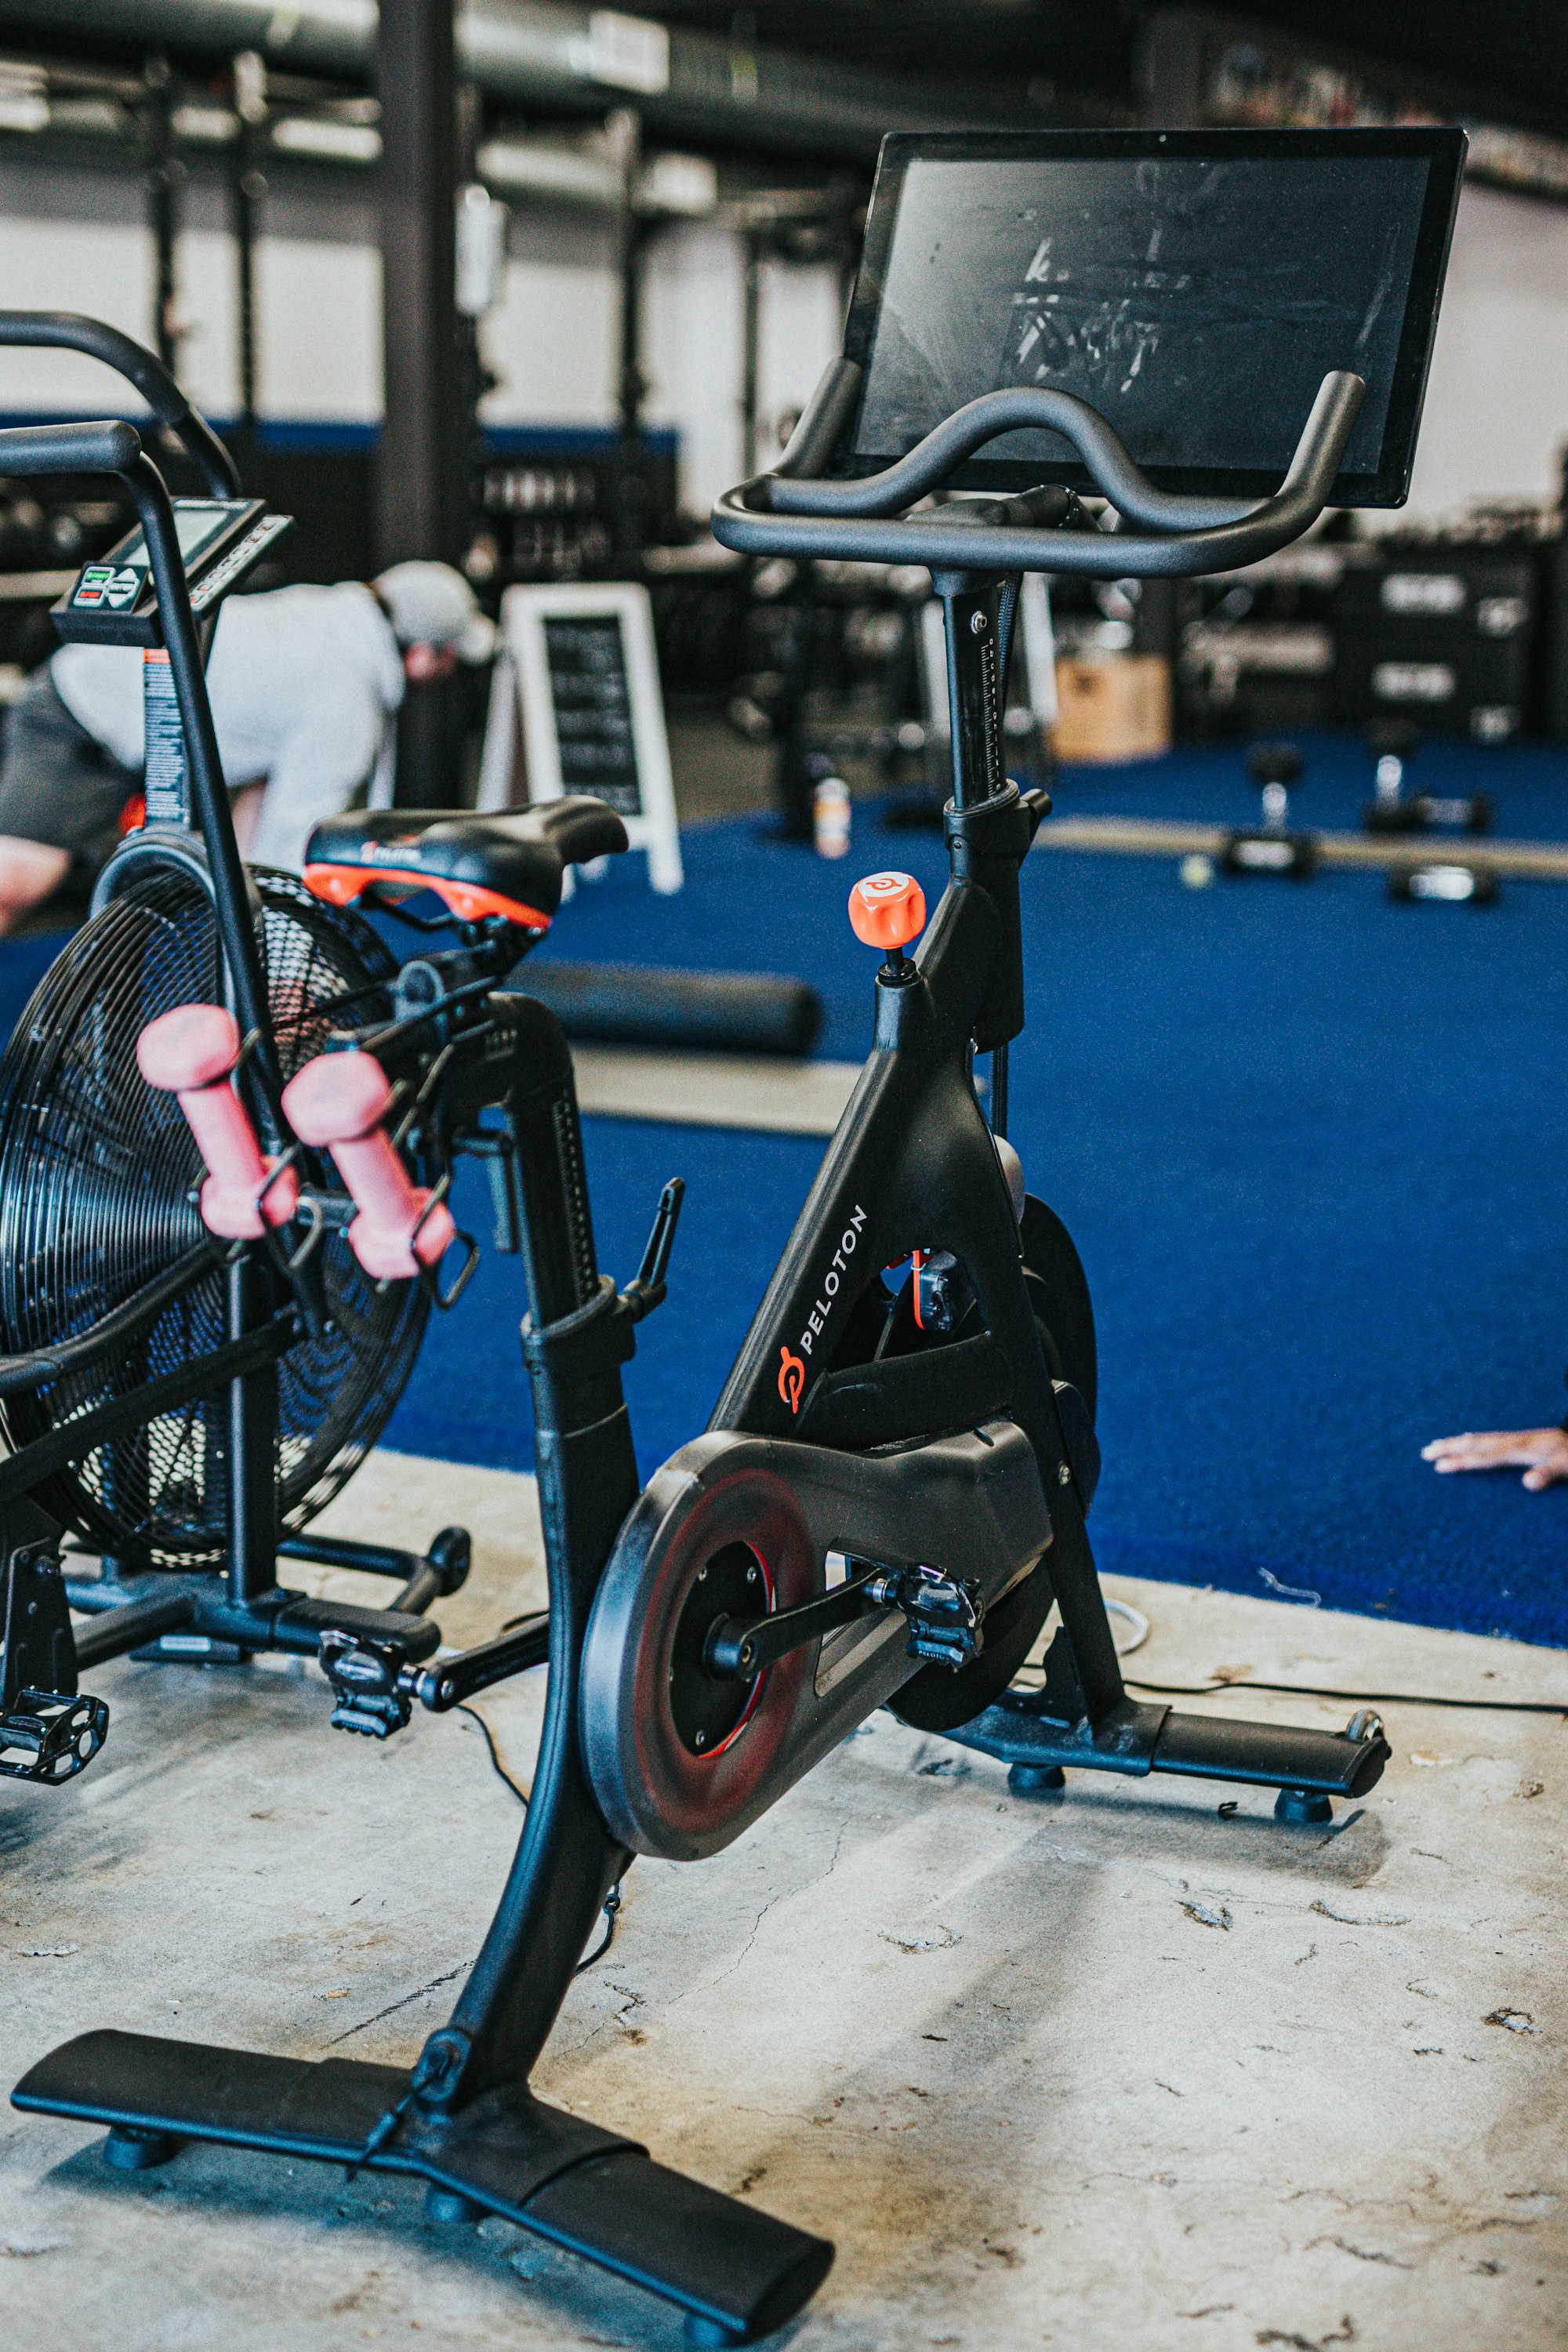 Amazon, Nike, And a Slew of Others Linked to Peloton Acquisition